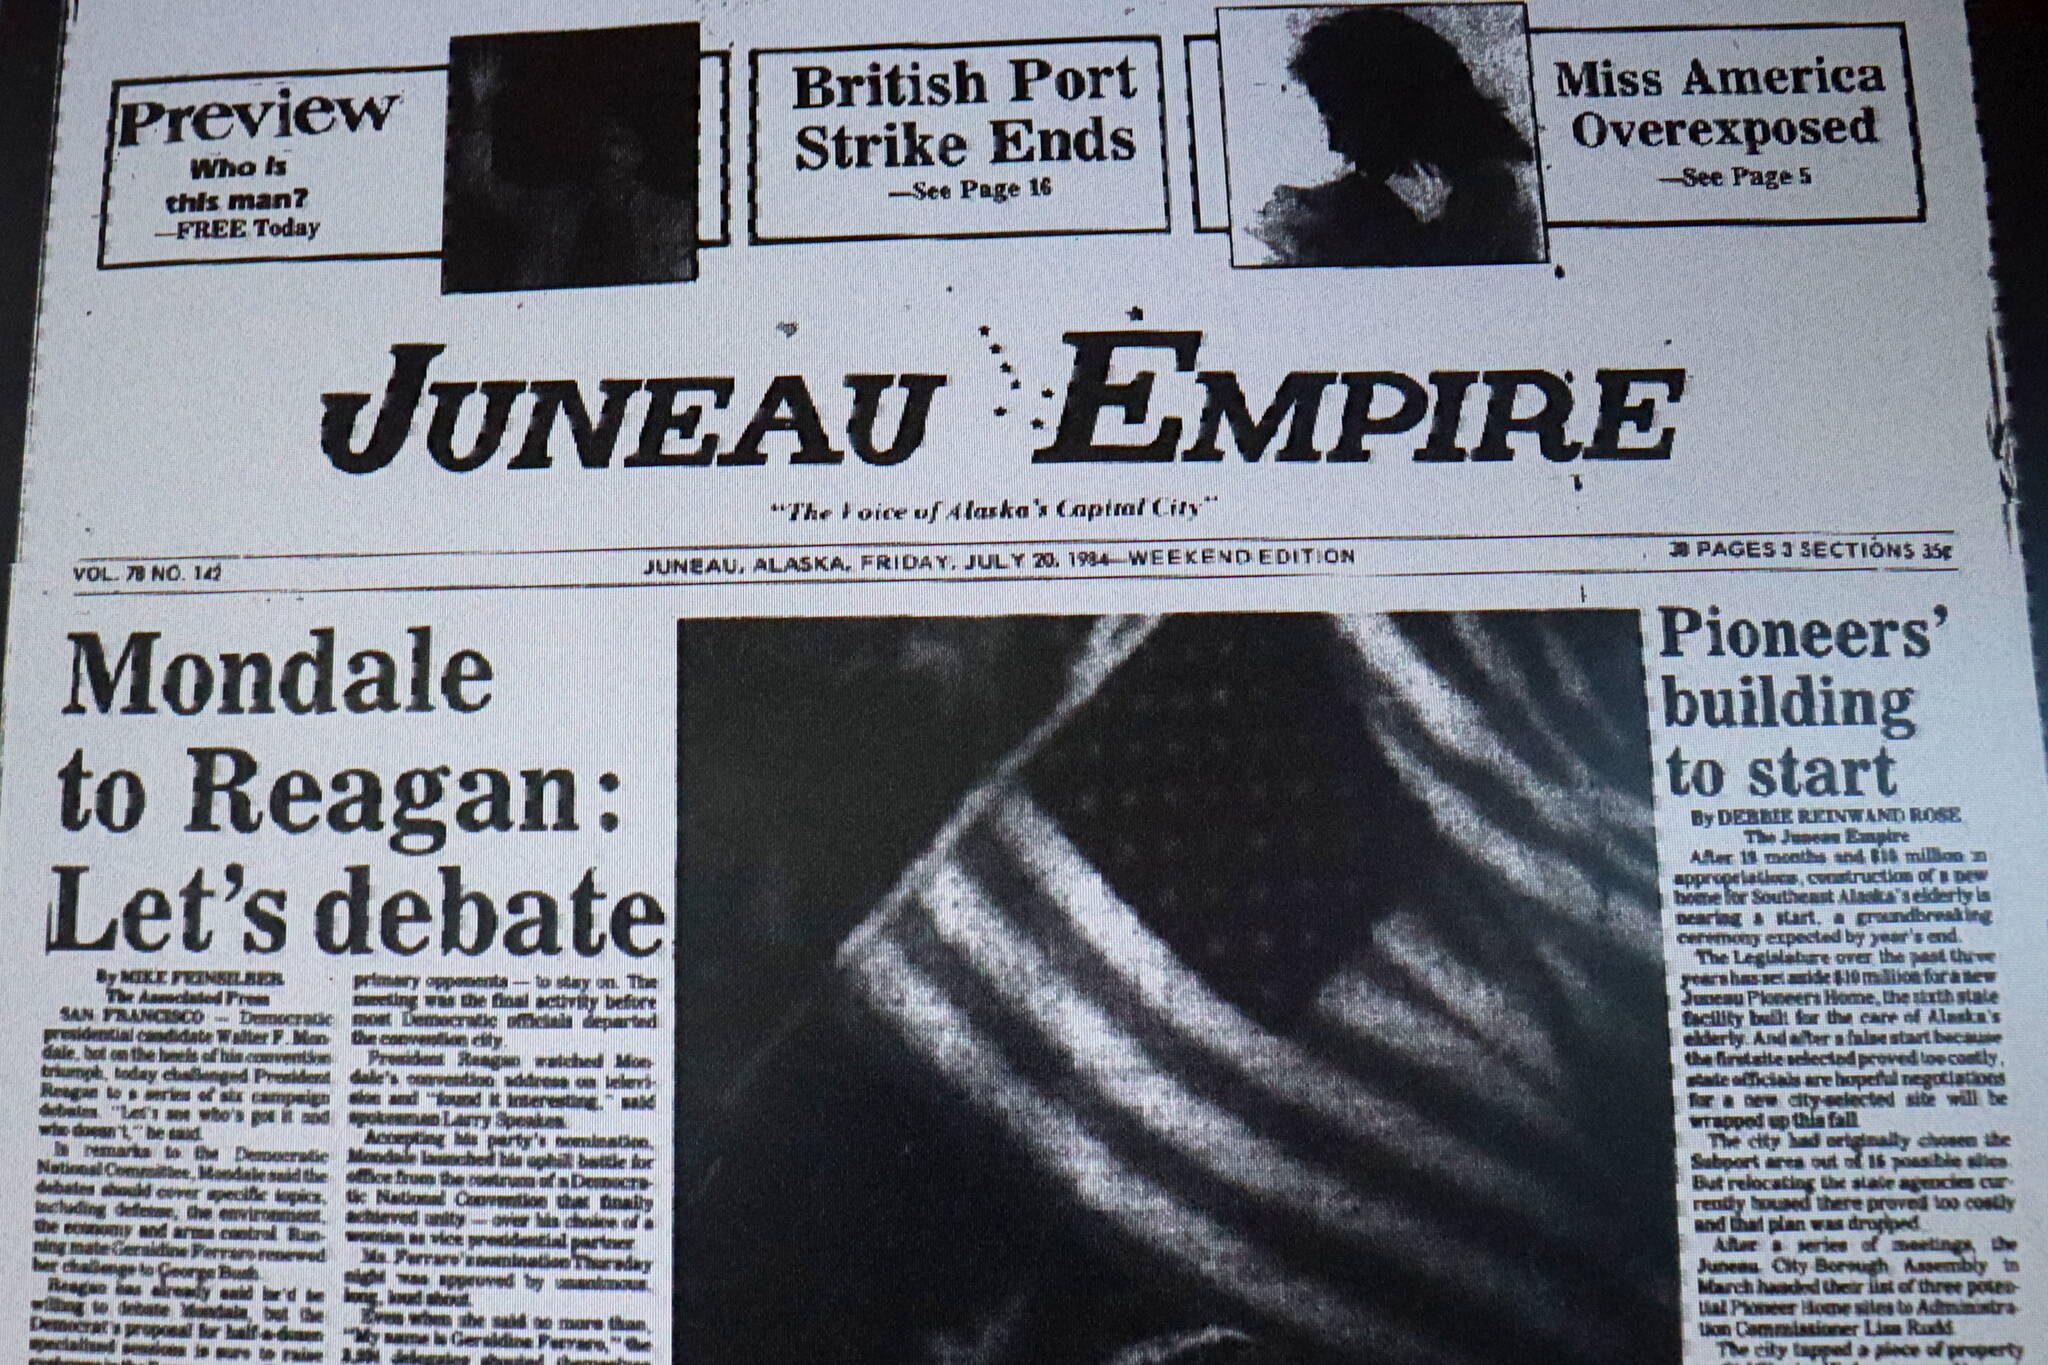 The front page of the Juneau Empire on July 20, 1994. (Mark Sabbatini / Juneau Empire)